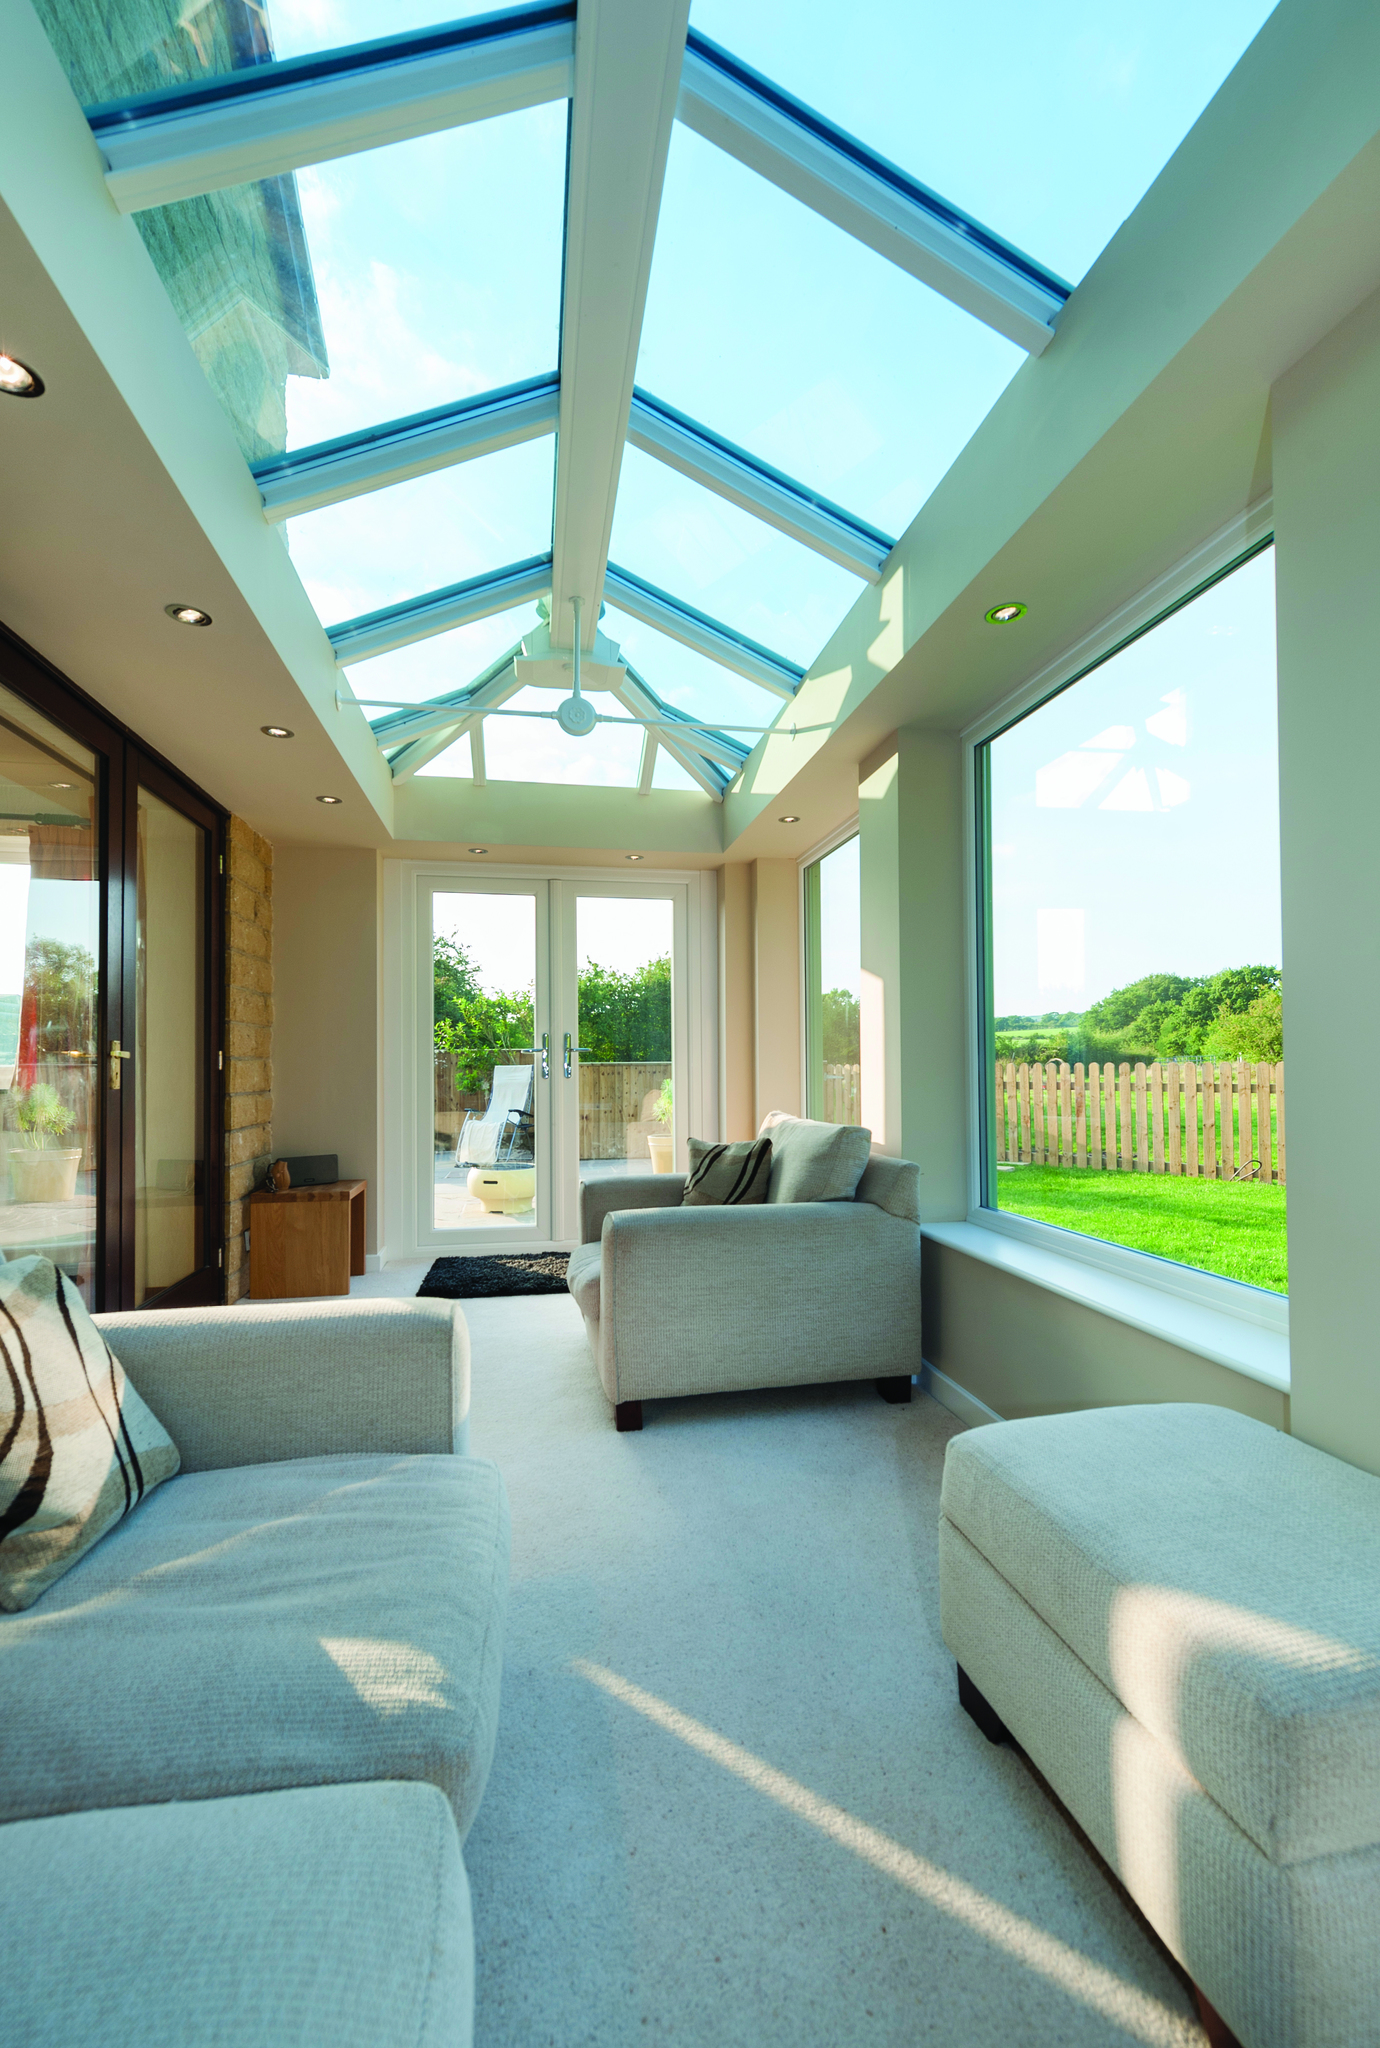 Luminous and spacious Livin room conservatory designed by 21st century.